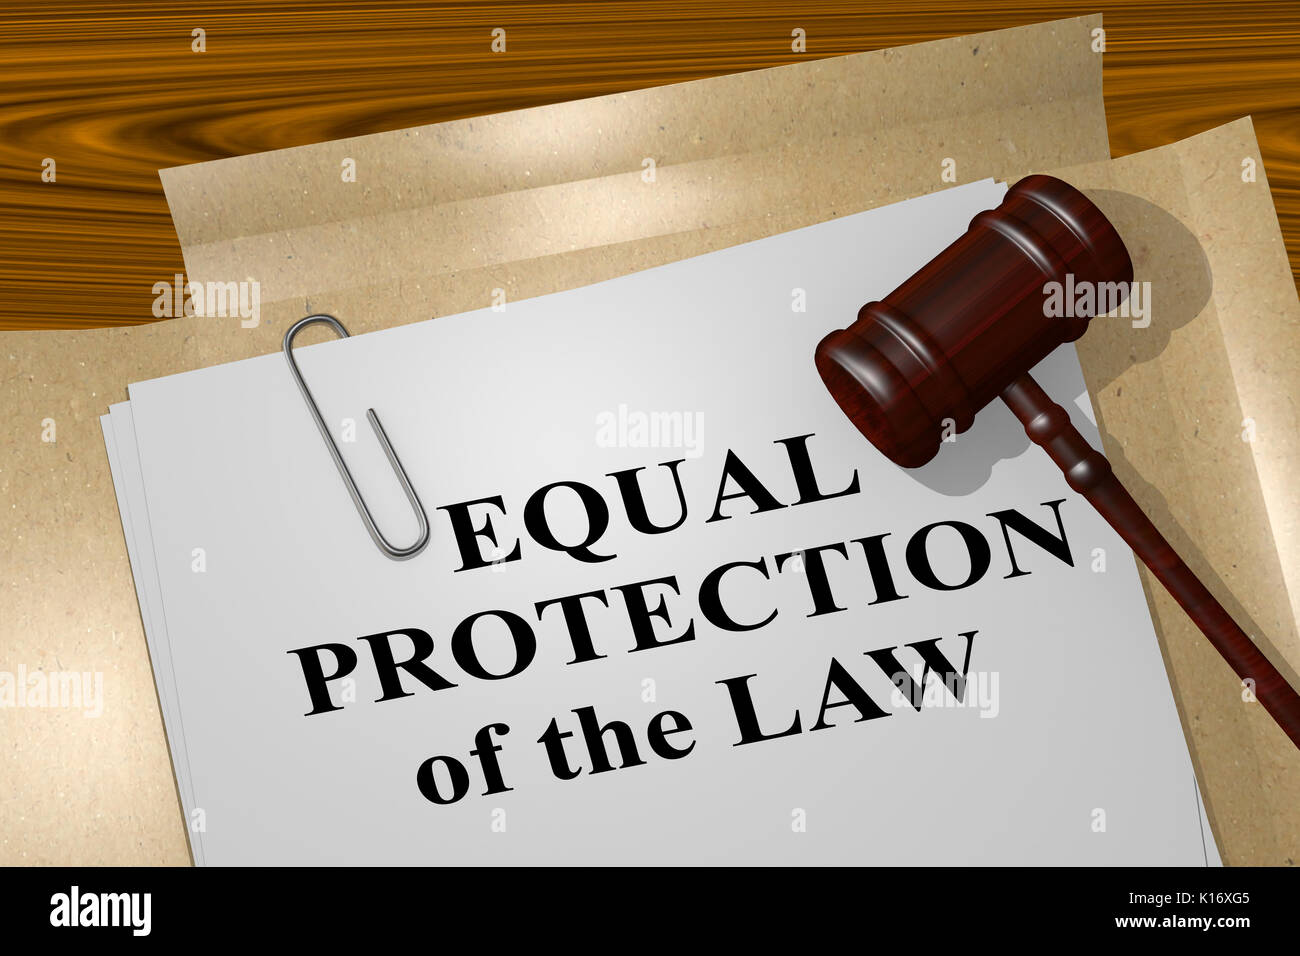 Image result for EQUAL PROTECTION OF LAW